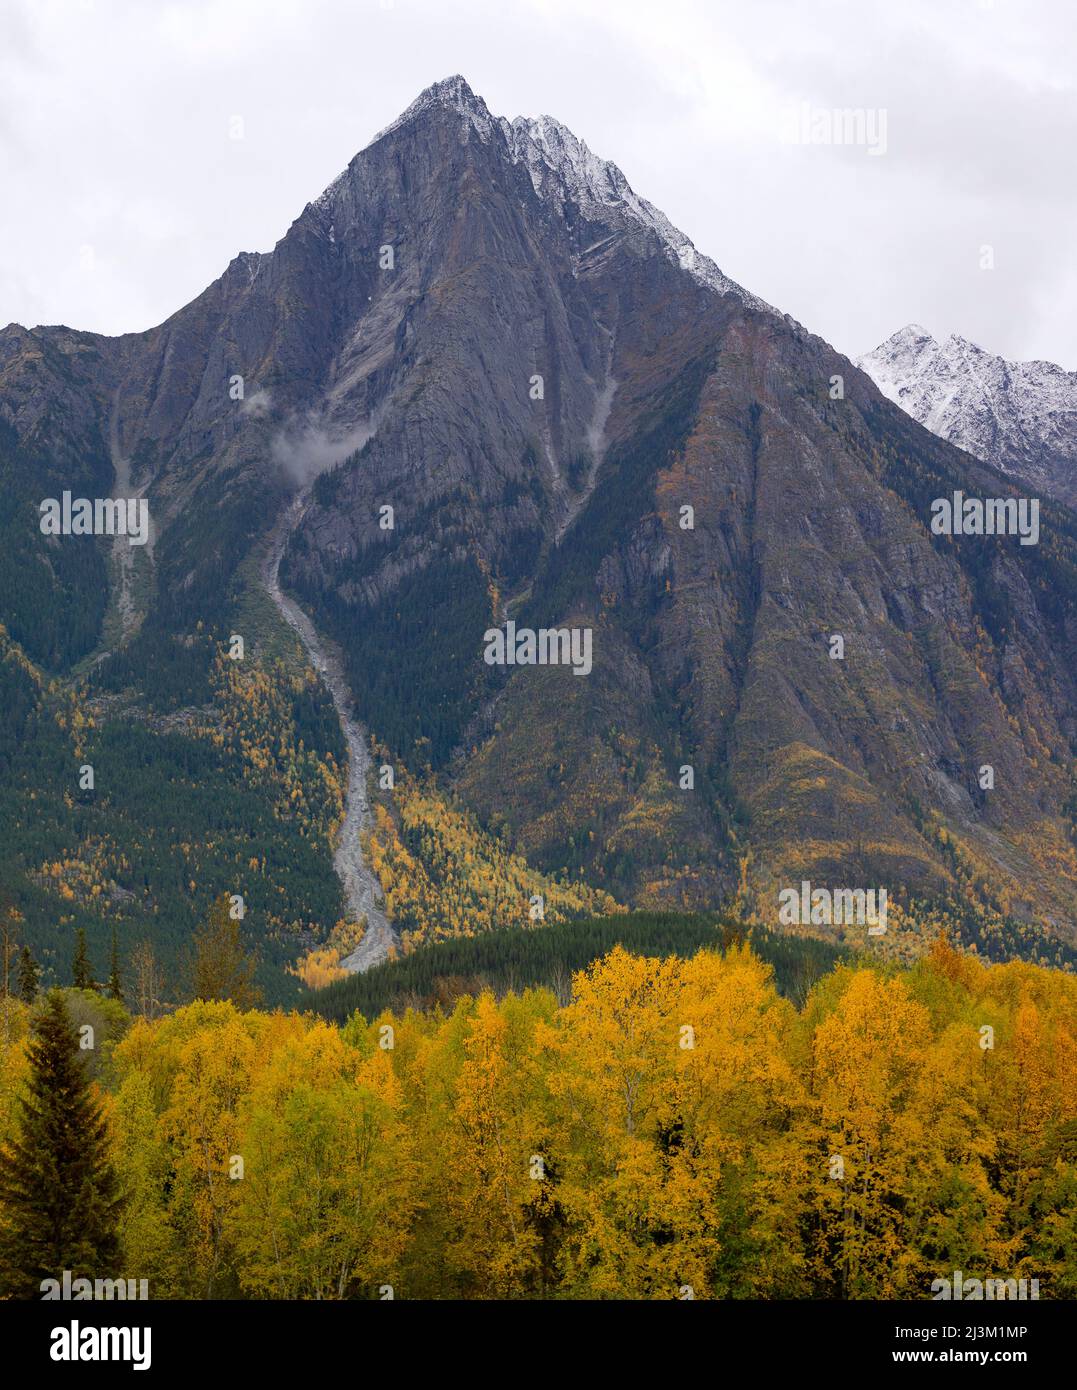 Vast and dramatic landscape of rugged mountain peaks under a cloudy sky and an autumn coloured forest; British Columbia, Canada Stock Photo